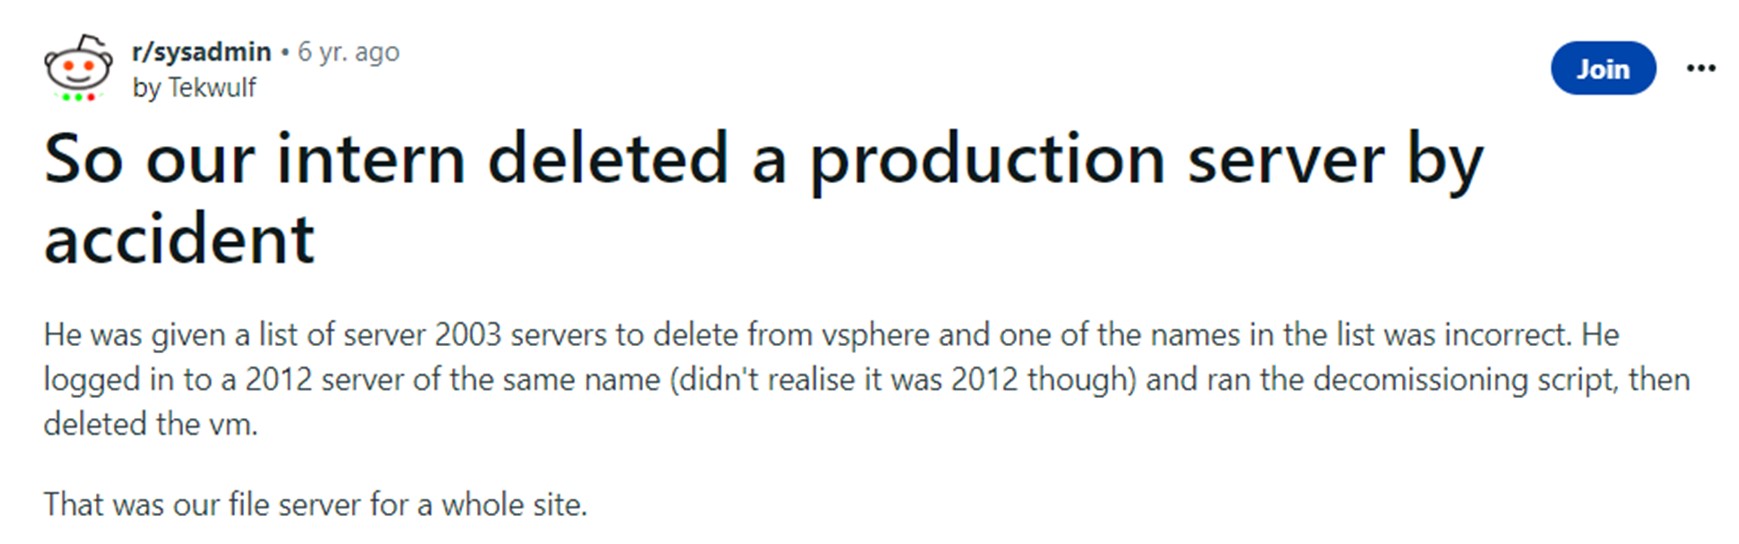 Reddit post: "our intern deleted a production server by accident"